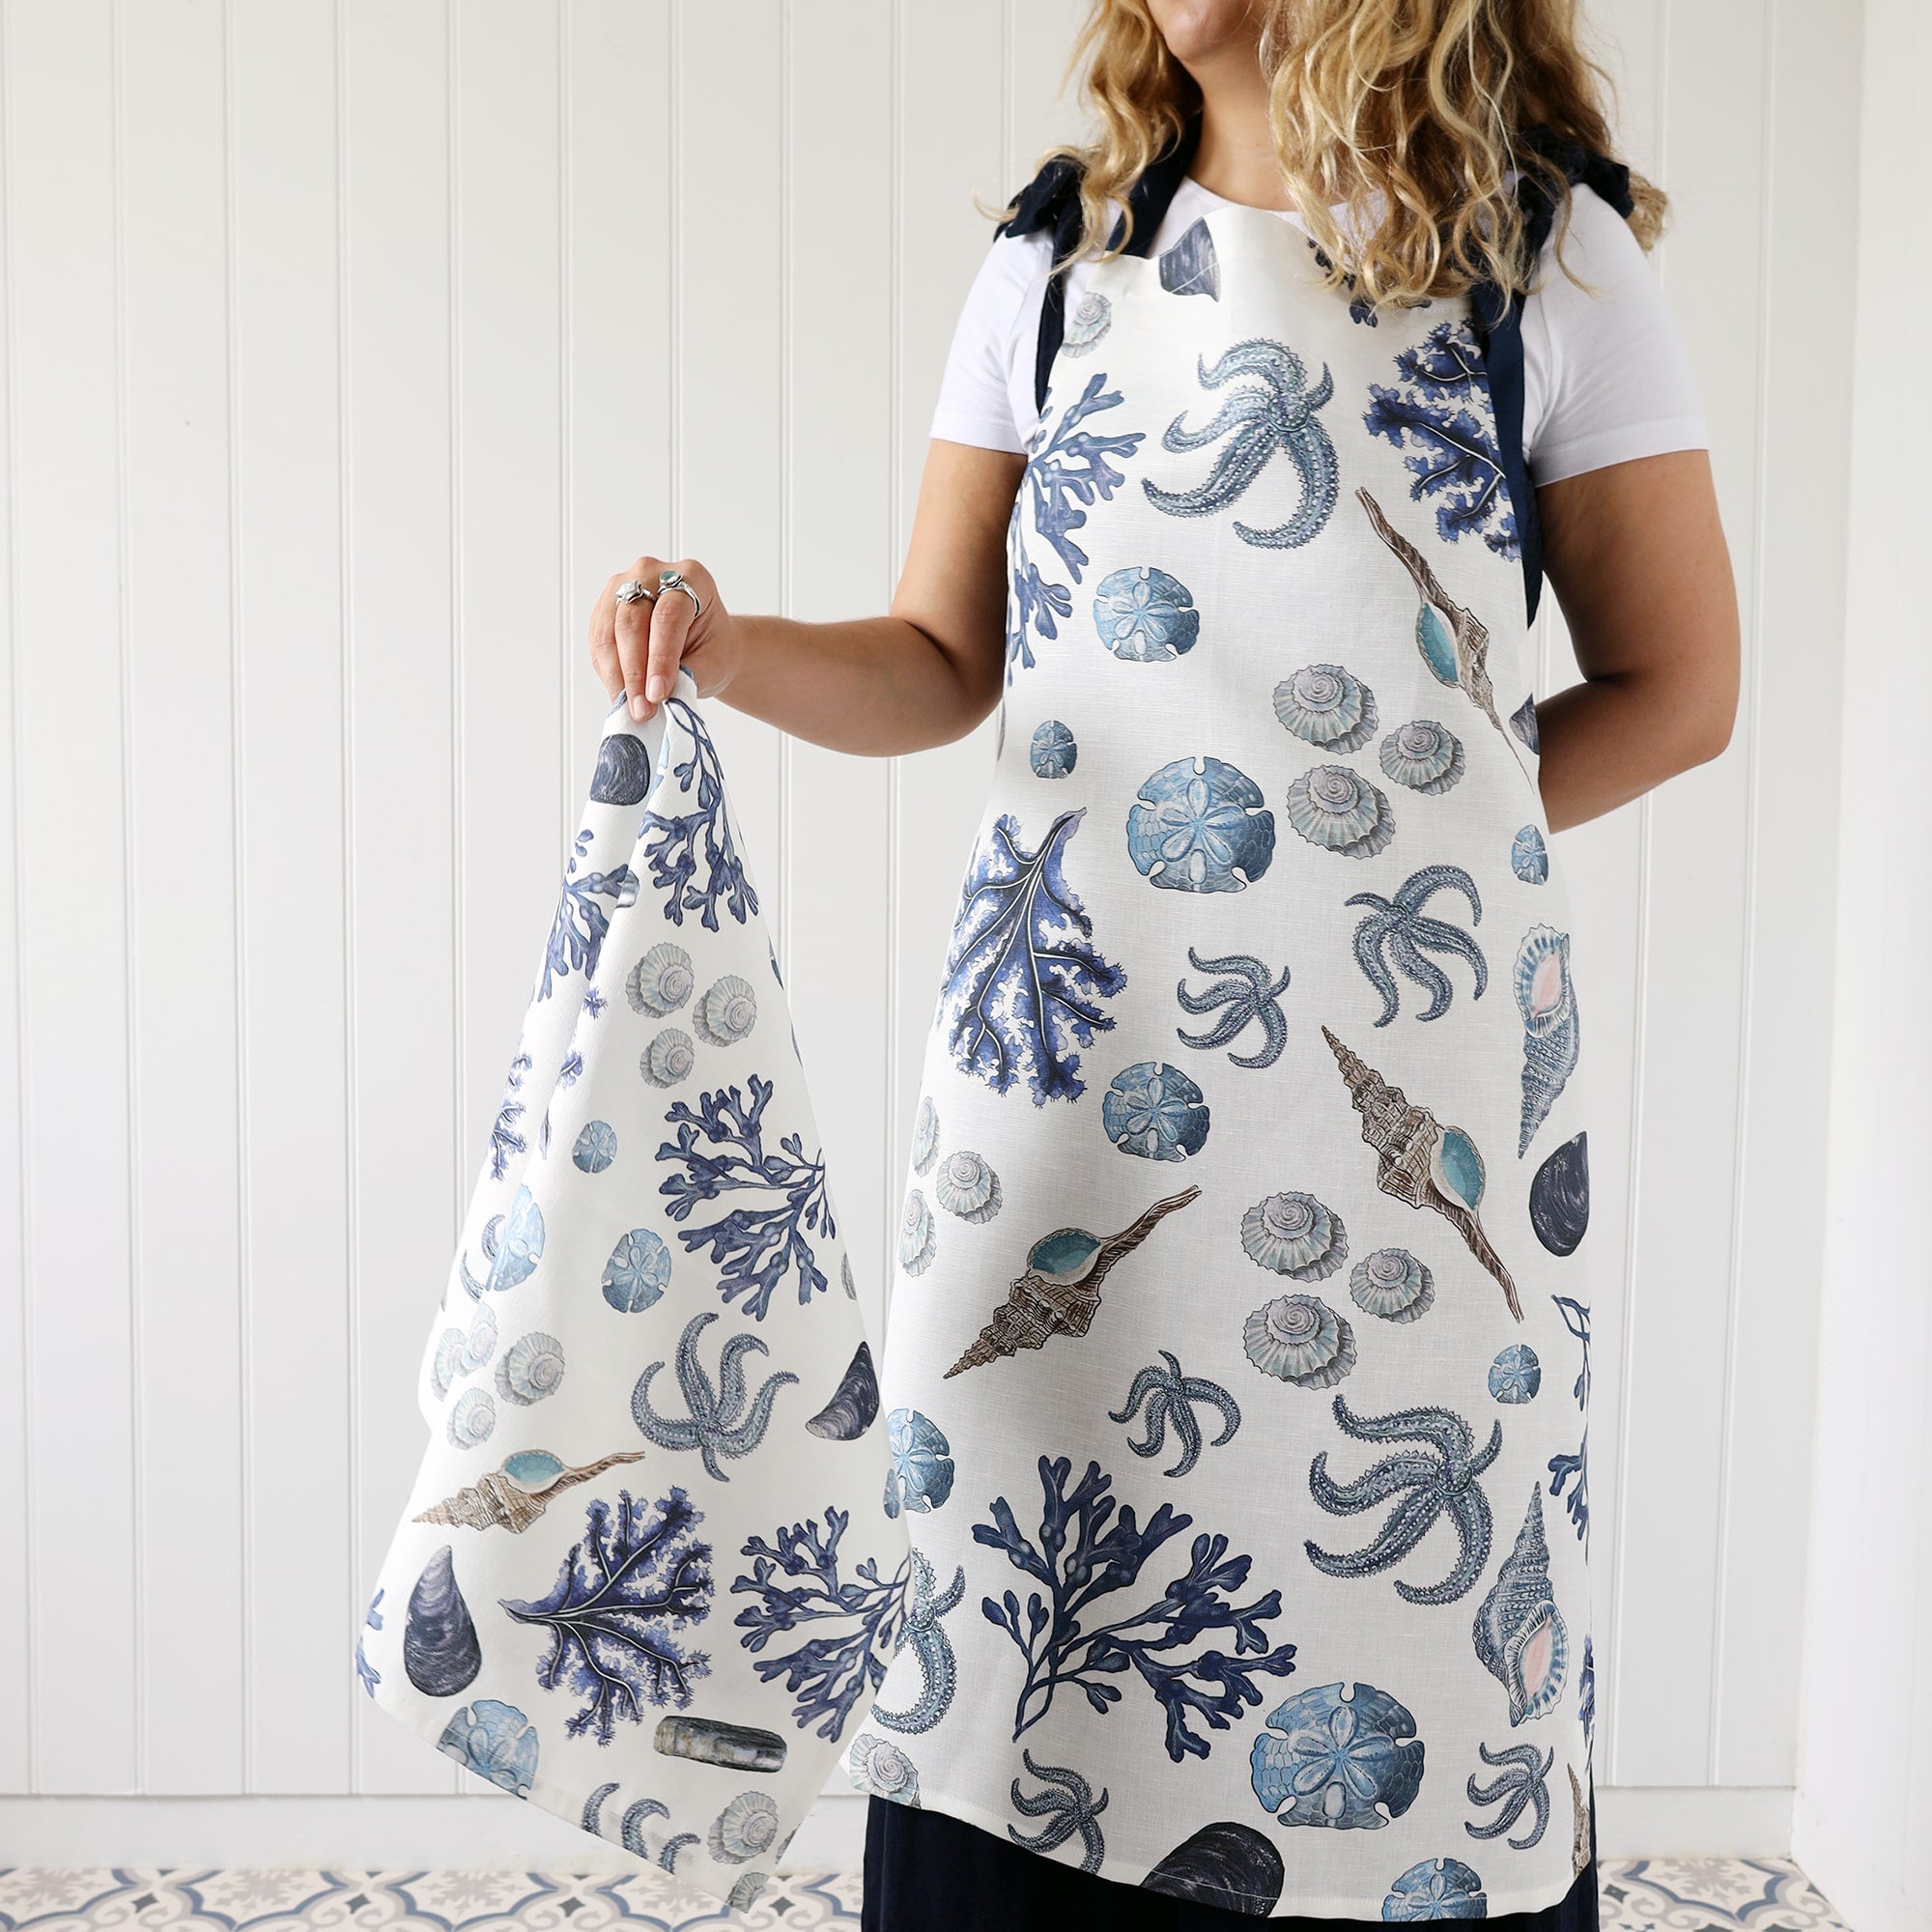 Our beachcomber apron being worn by a model who is also holding a beachcomber tea towel